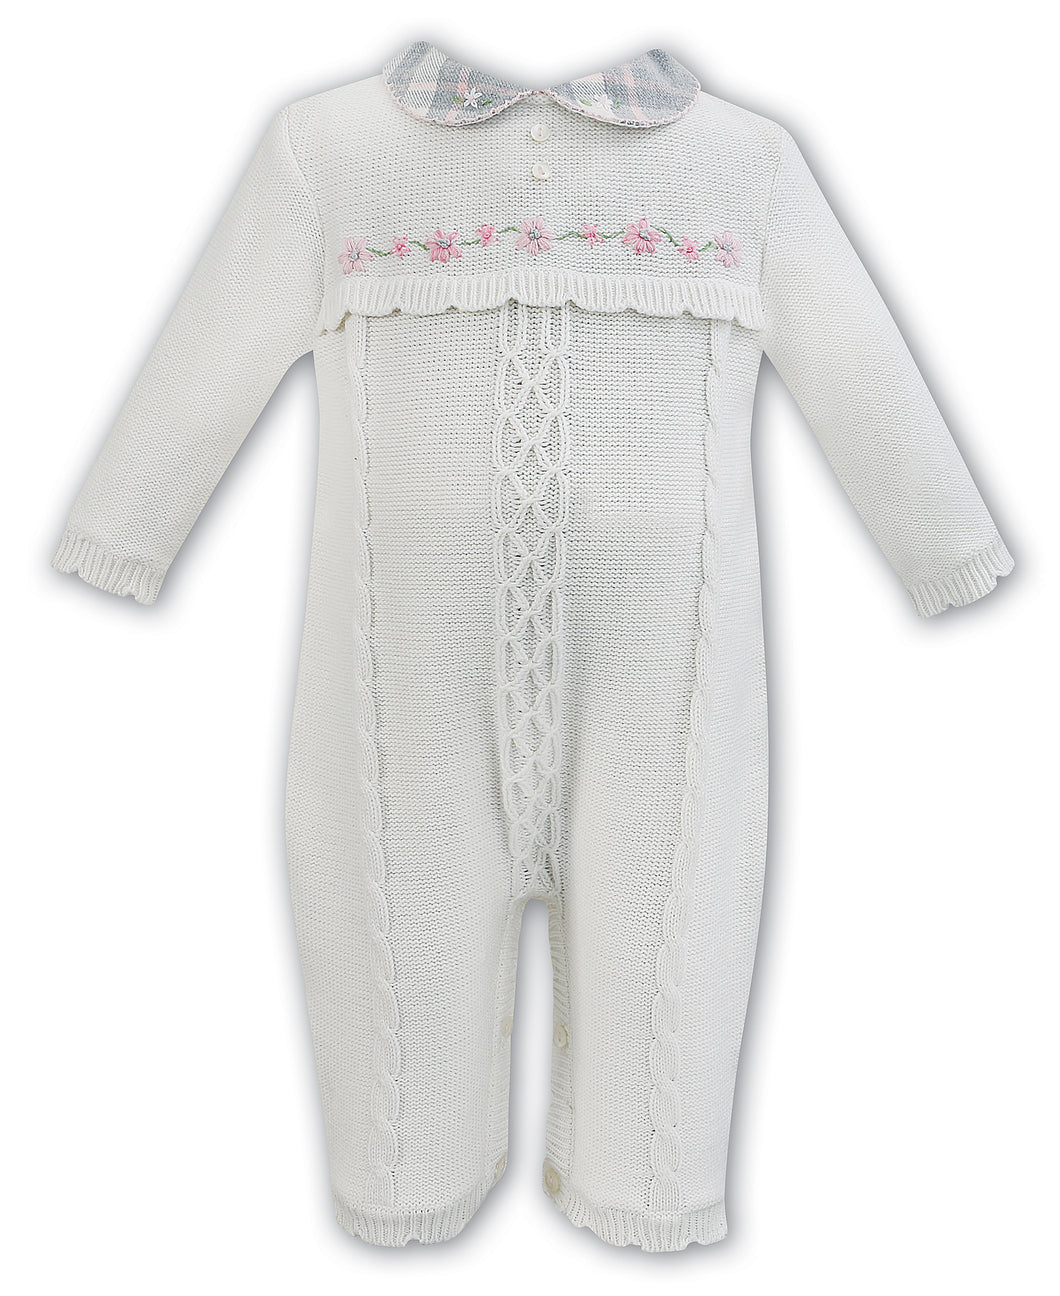 Girls Embroided, detailed Collar Cable Knitted RomperIvory/Pink/Grey Romper